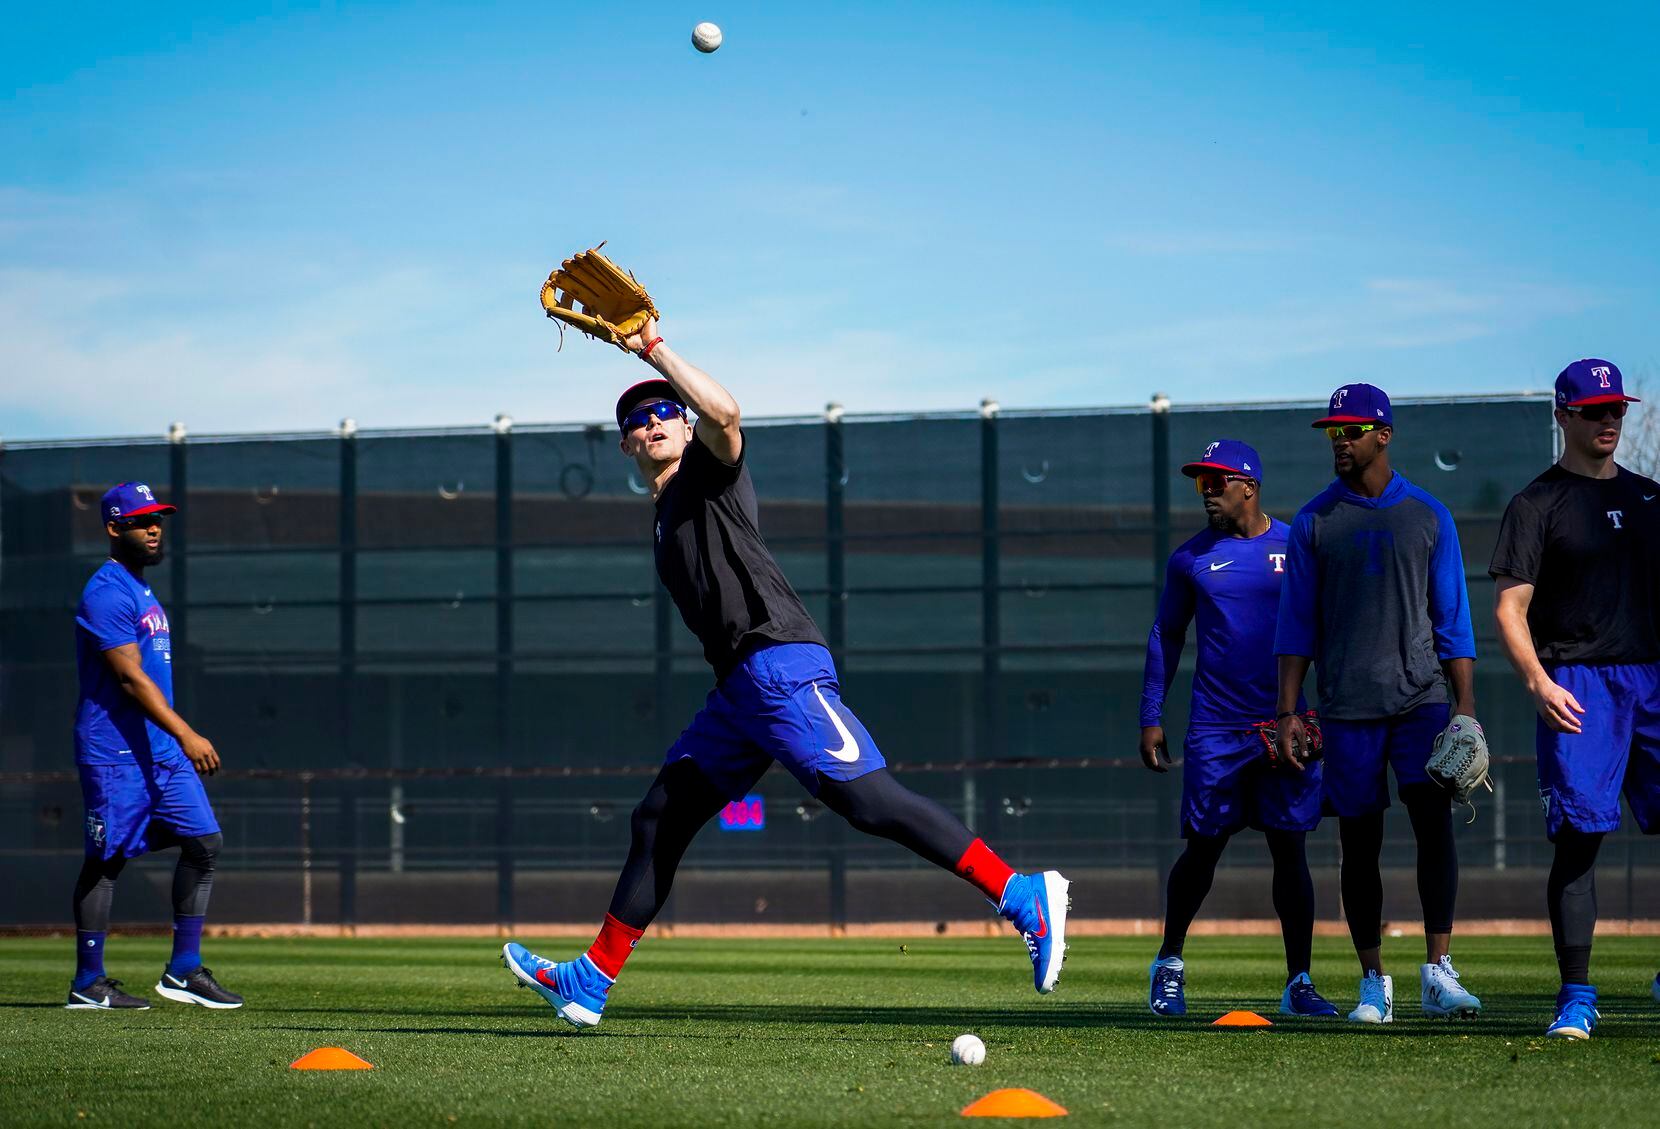 Texas Rangers outfielder Scott Heineman makes a catch while participating in a fielding...